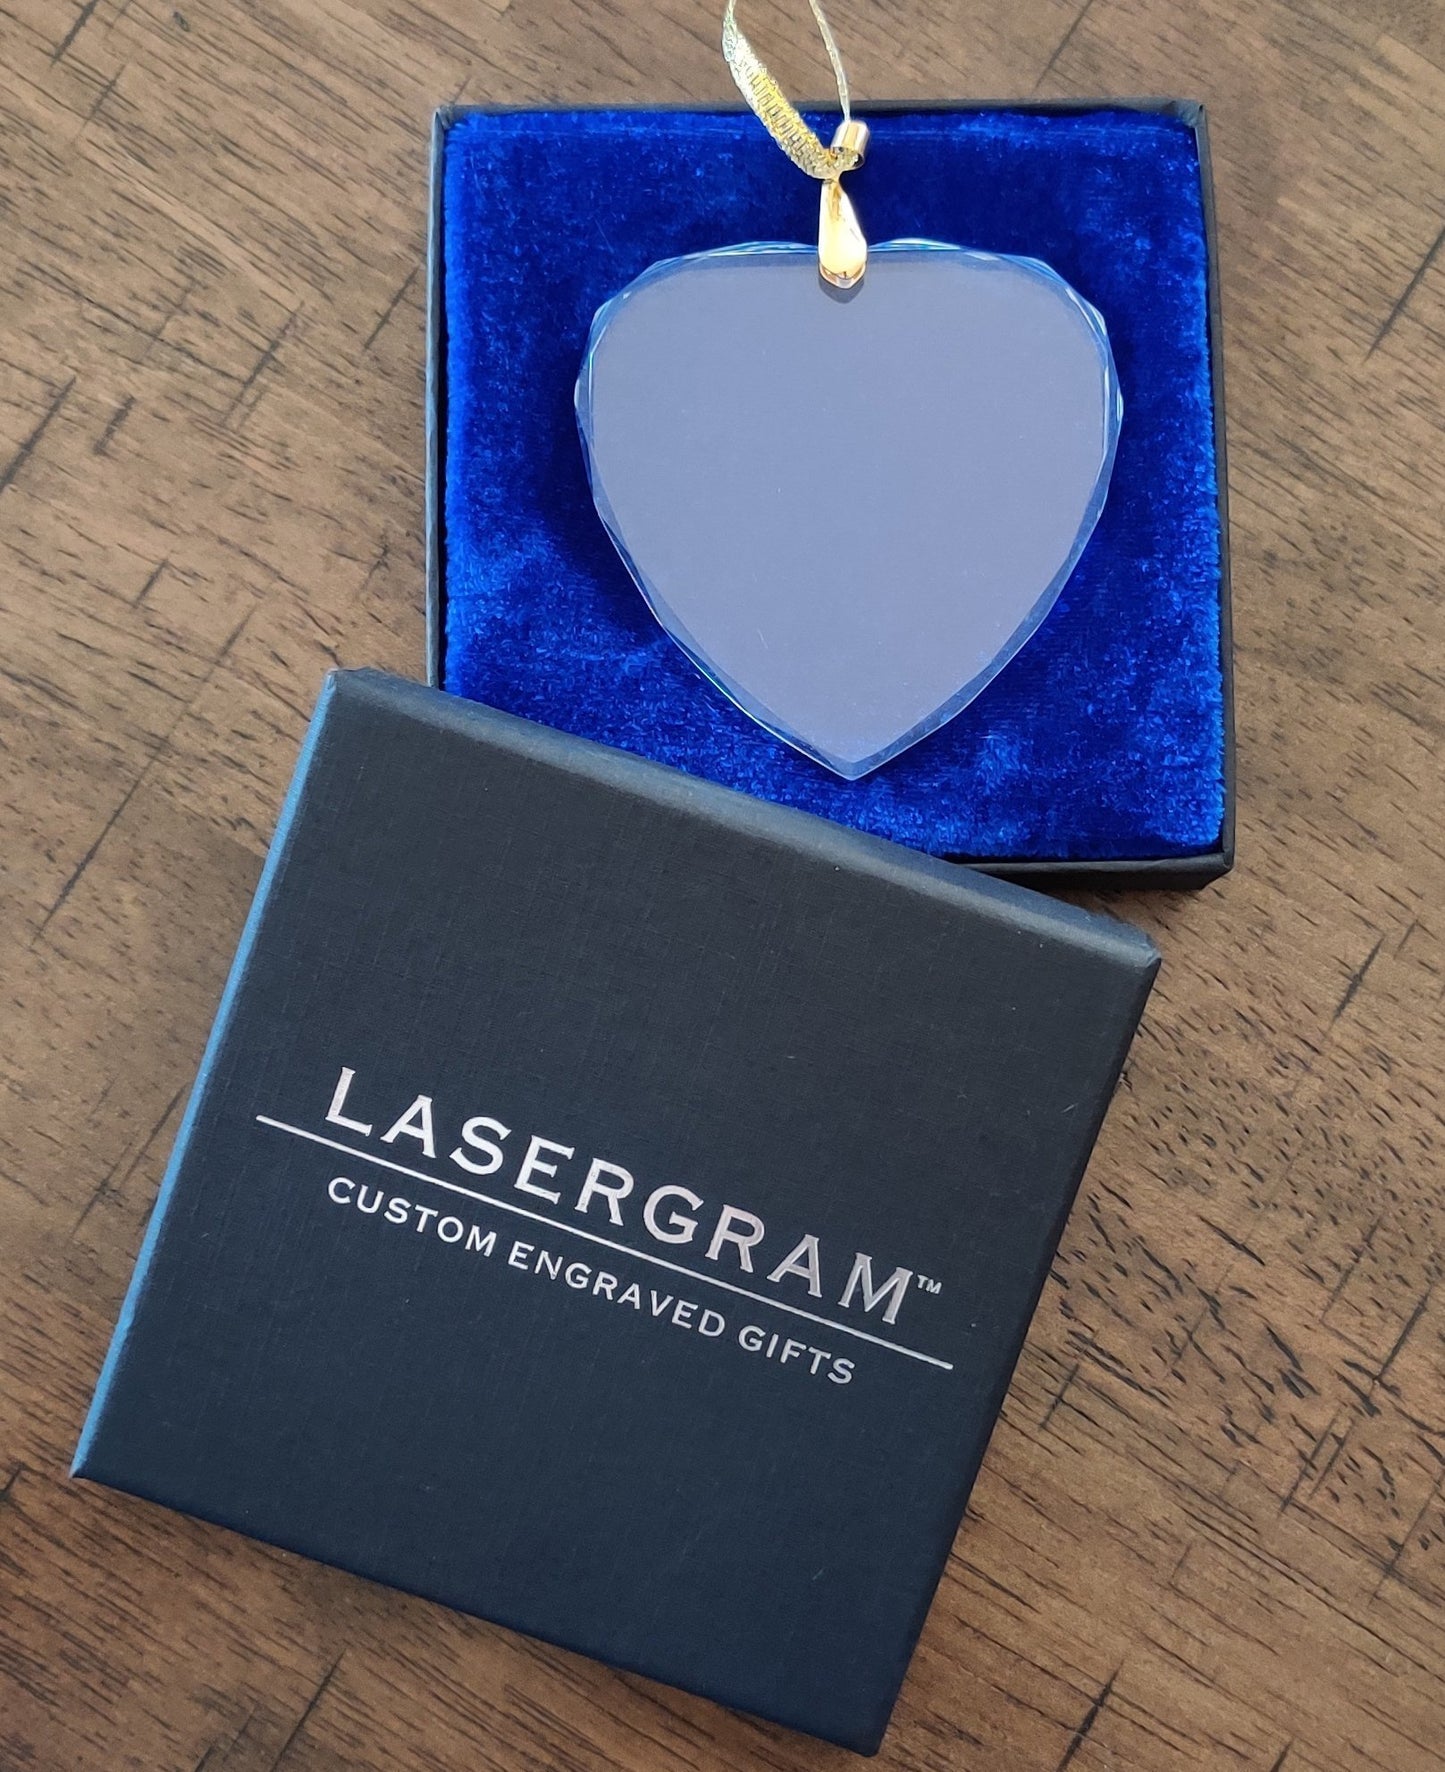 LaserGram Christmas Ornament, My Sweet 16, Personalized Engraving Included (Heart Shape)